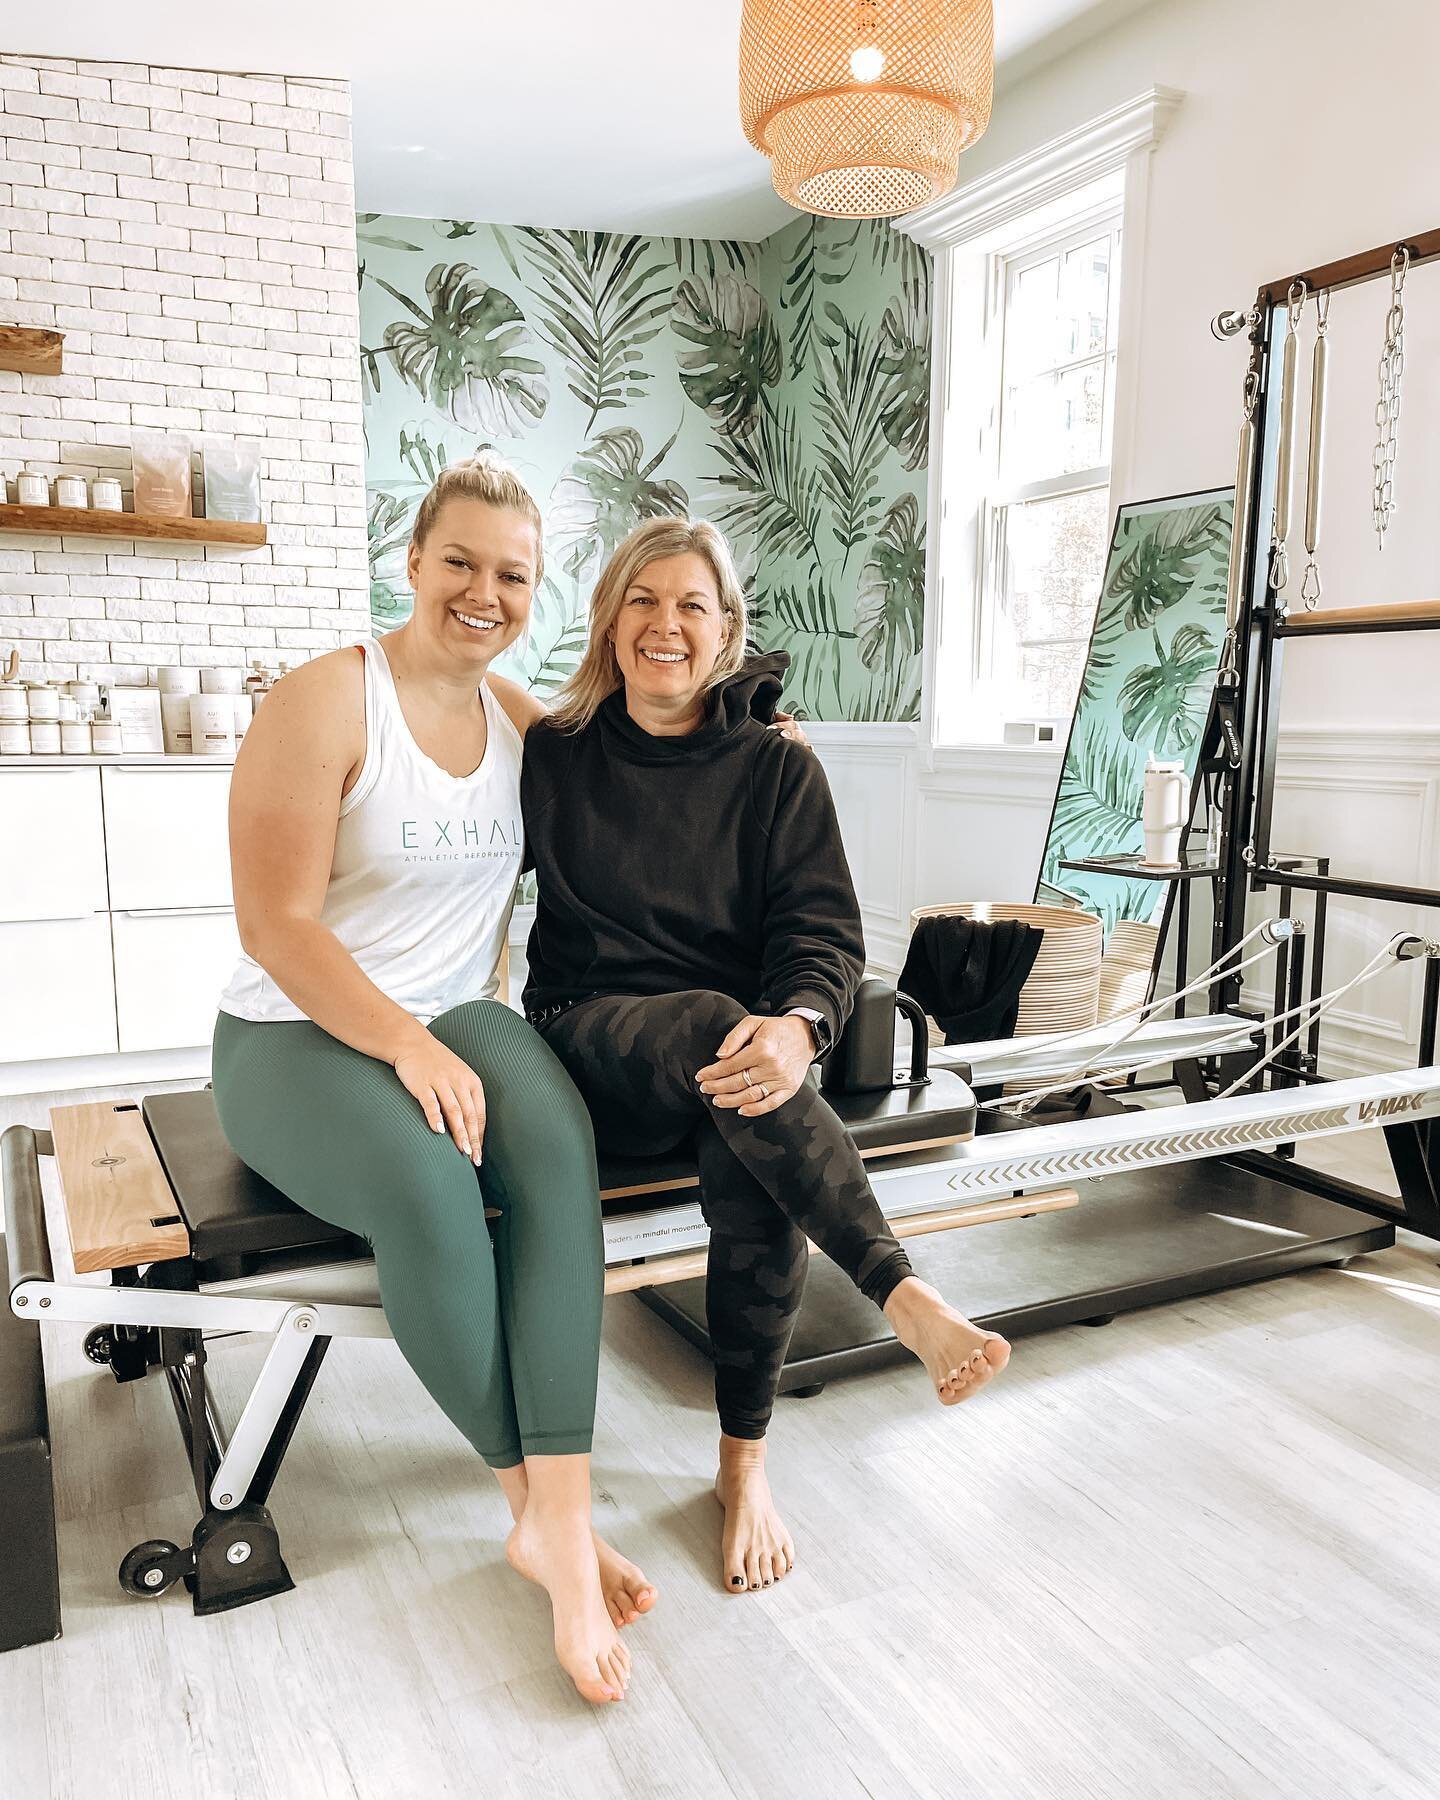 One of EXHALE&rsquo;s strong mother-daughter duos you see taking classes together!

Mother's Day is May 14th. Here are some ideas to celebrate MOM:

🌸 invite your mama to a class

🌼 pick out one of our lovely skin and beauty products for her to enj